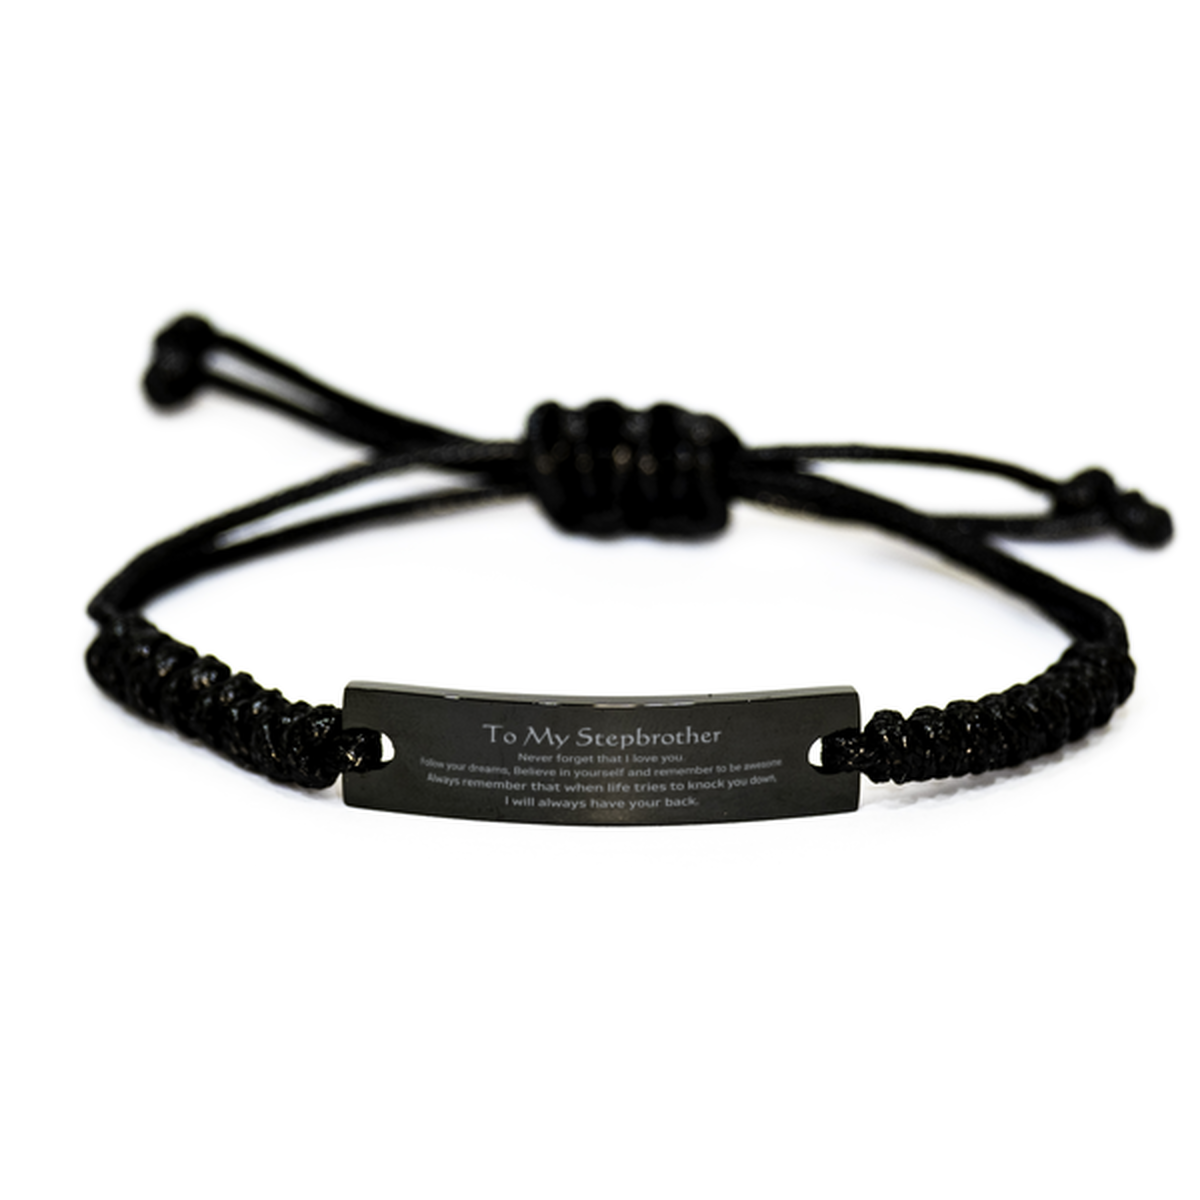 Inspirational Gifts for Stepbrother, Follow your dreams, Believe in yourself, Stepbrother Black Rope Bracelet, Birthday Christmas Unique Gifts For Stepbrother